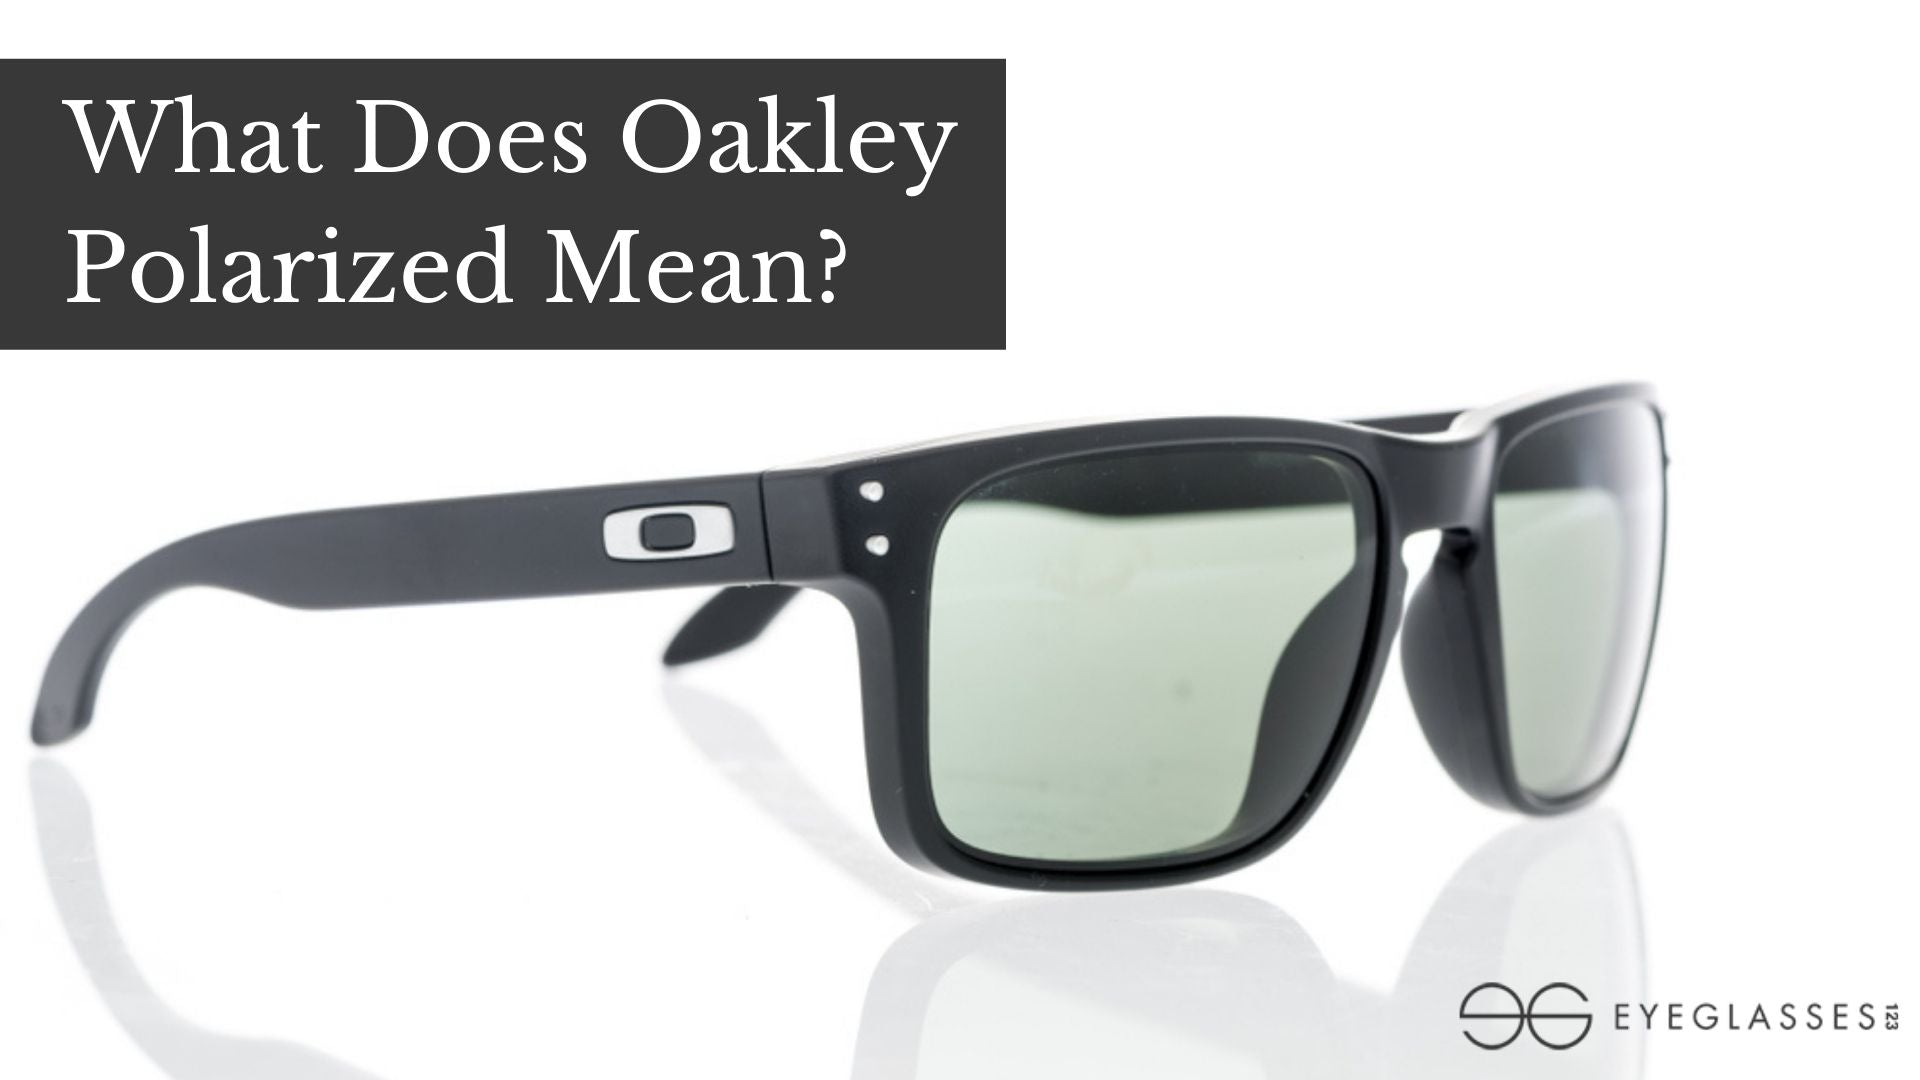 What Does Oakley Polarized Mean?